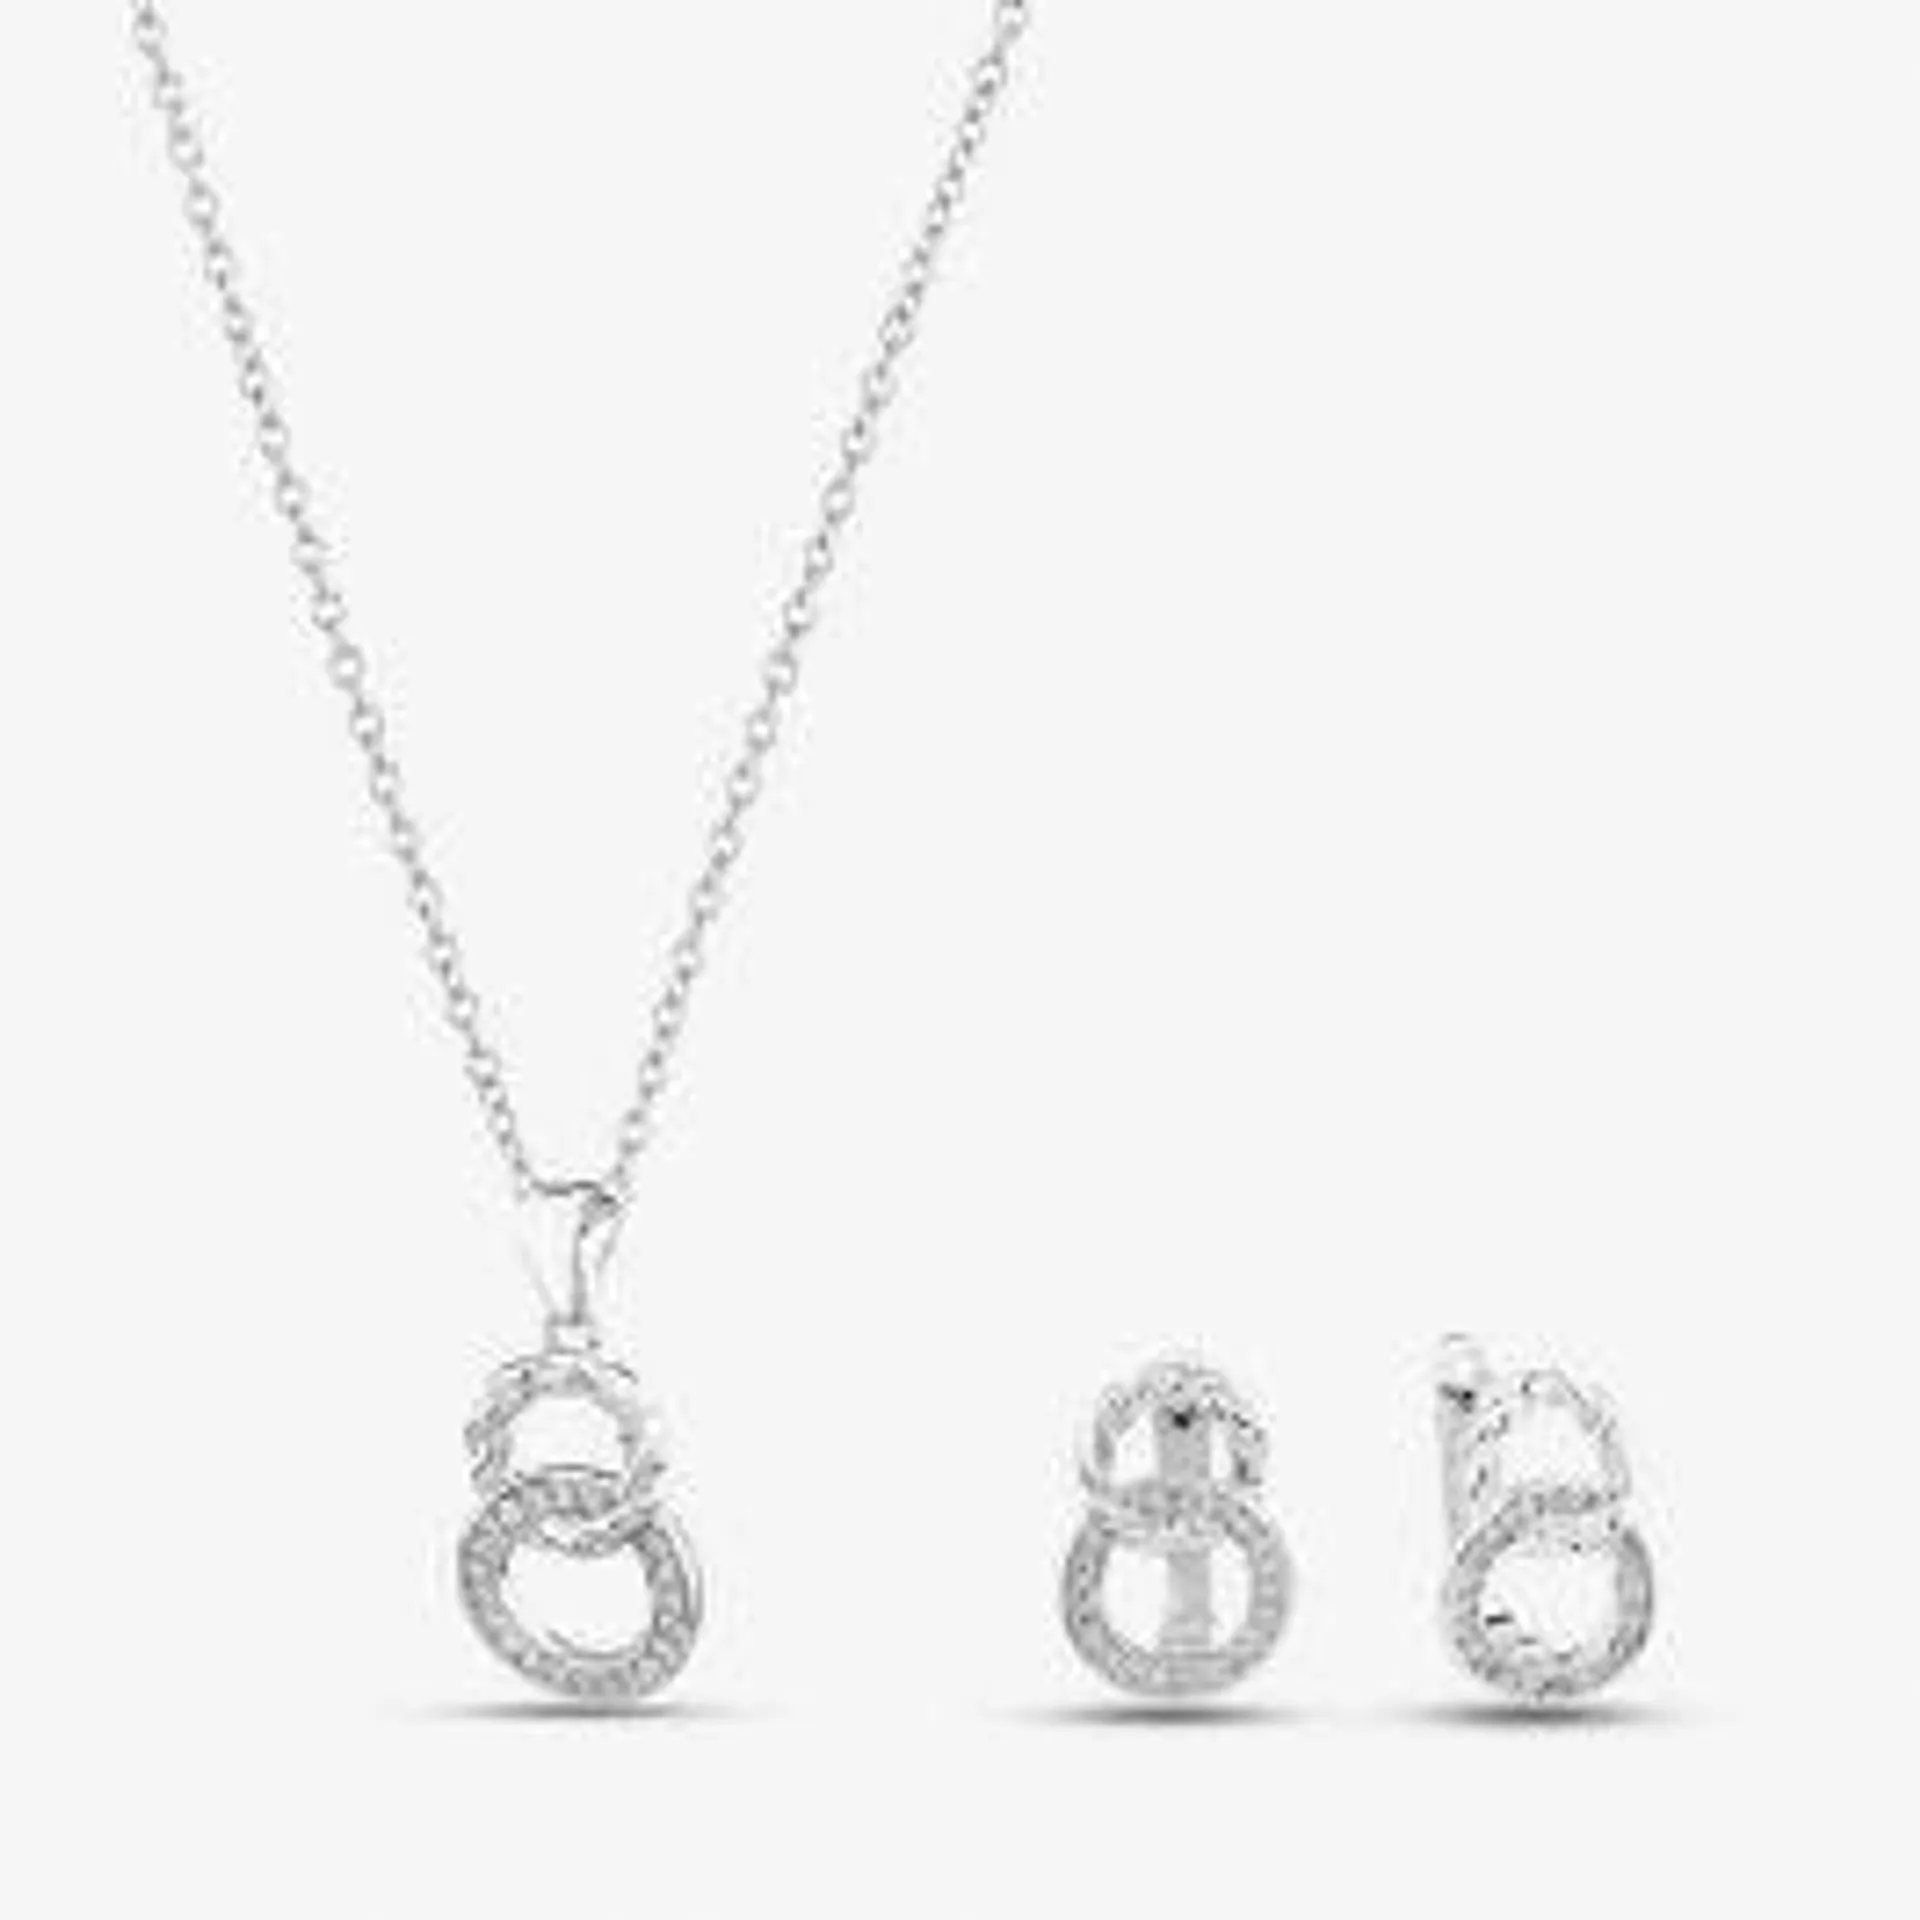 Silver & Cubic Zirconia Interlinked Double Circle Necklace & Earring Set SET16794